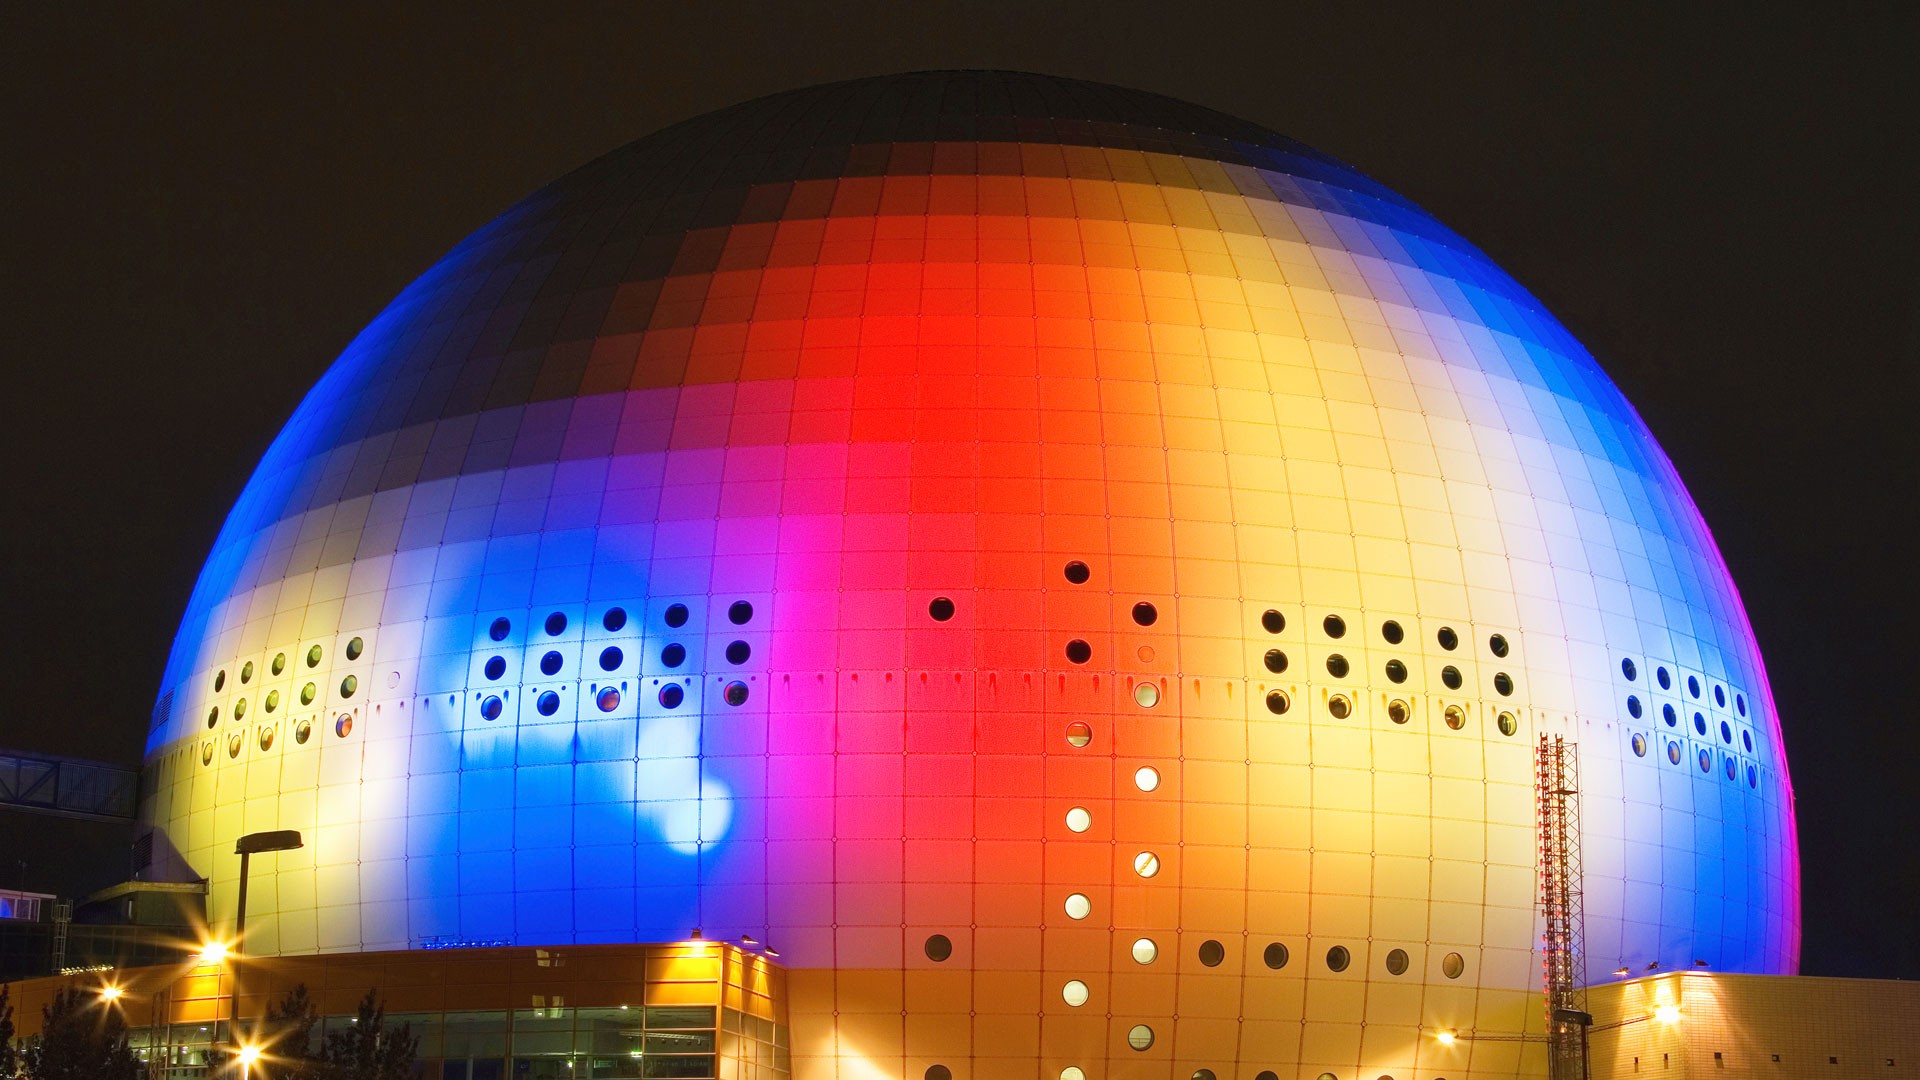 architecture, Modern, Sphere, Night, Sky, Museum, Circle, Colorful, Lights, Globen, Stockholm Wallpaper